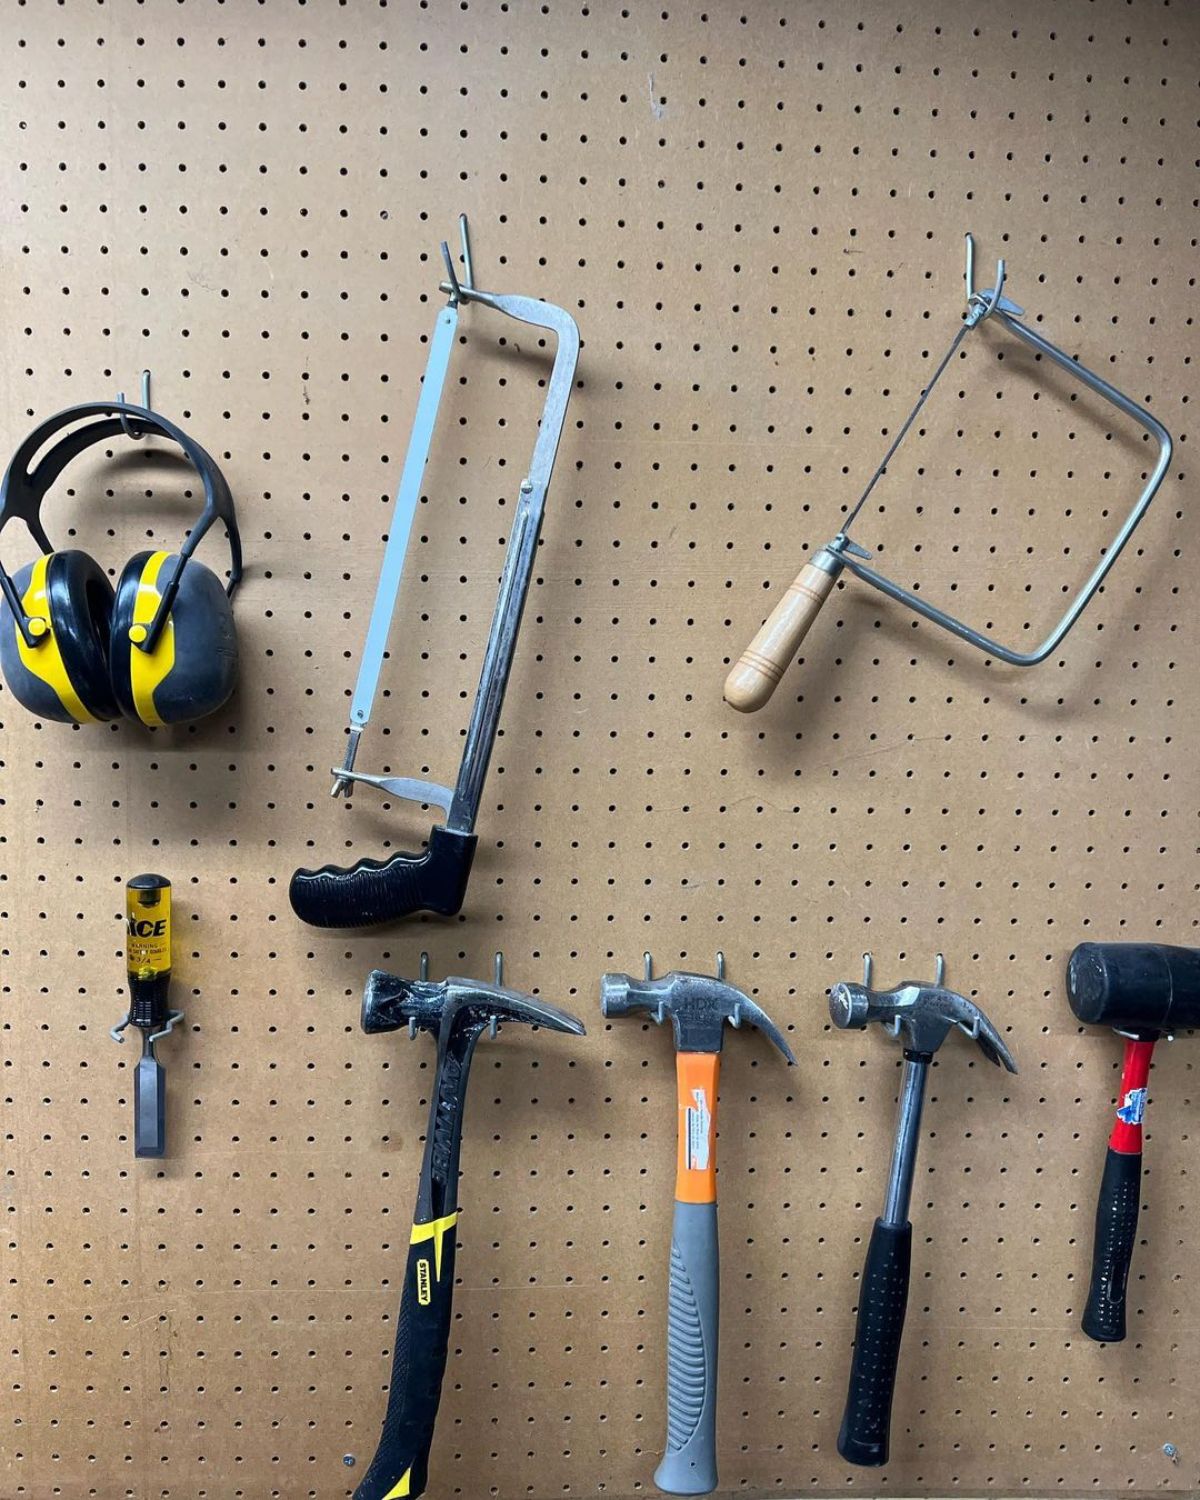 Pegboard with different tools.